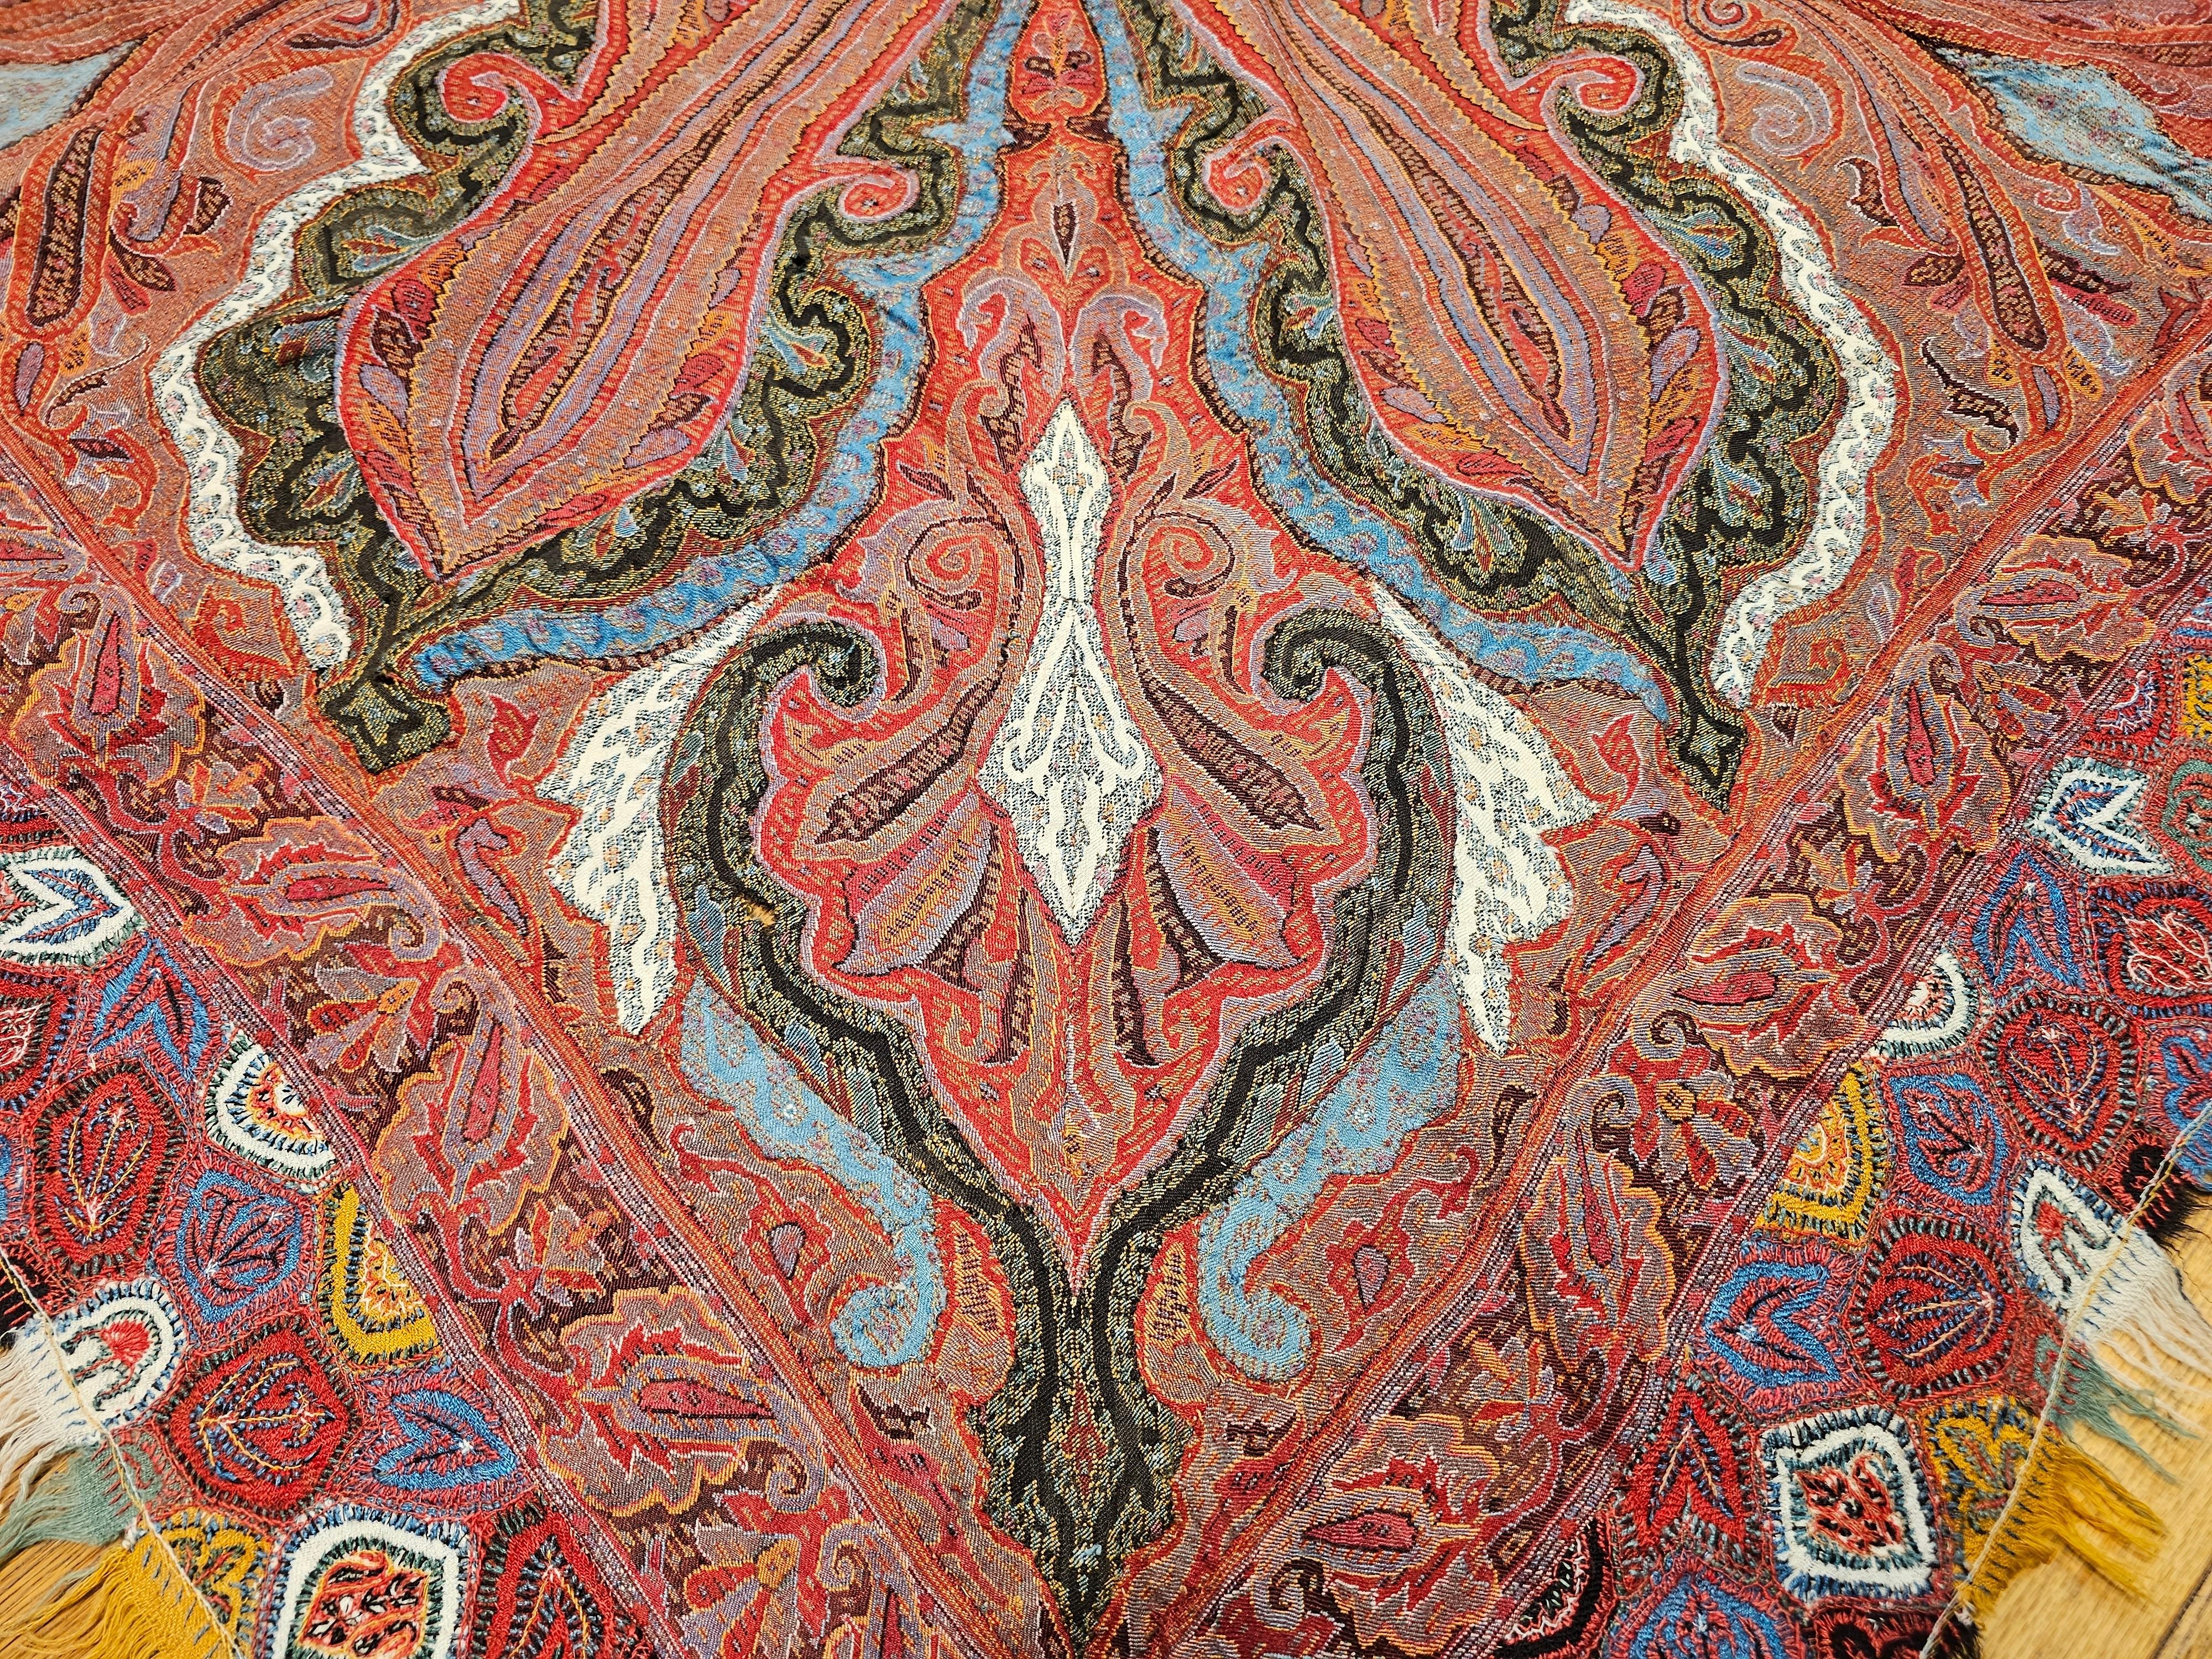 Mid 19th Century Hand Embroidered “Kashmiri Pieced Shawl” in “Butterfly” Pattern For Sale 5